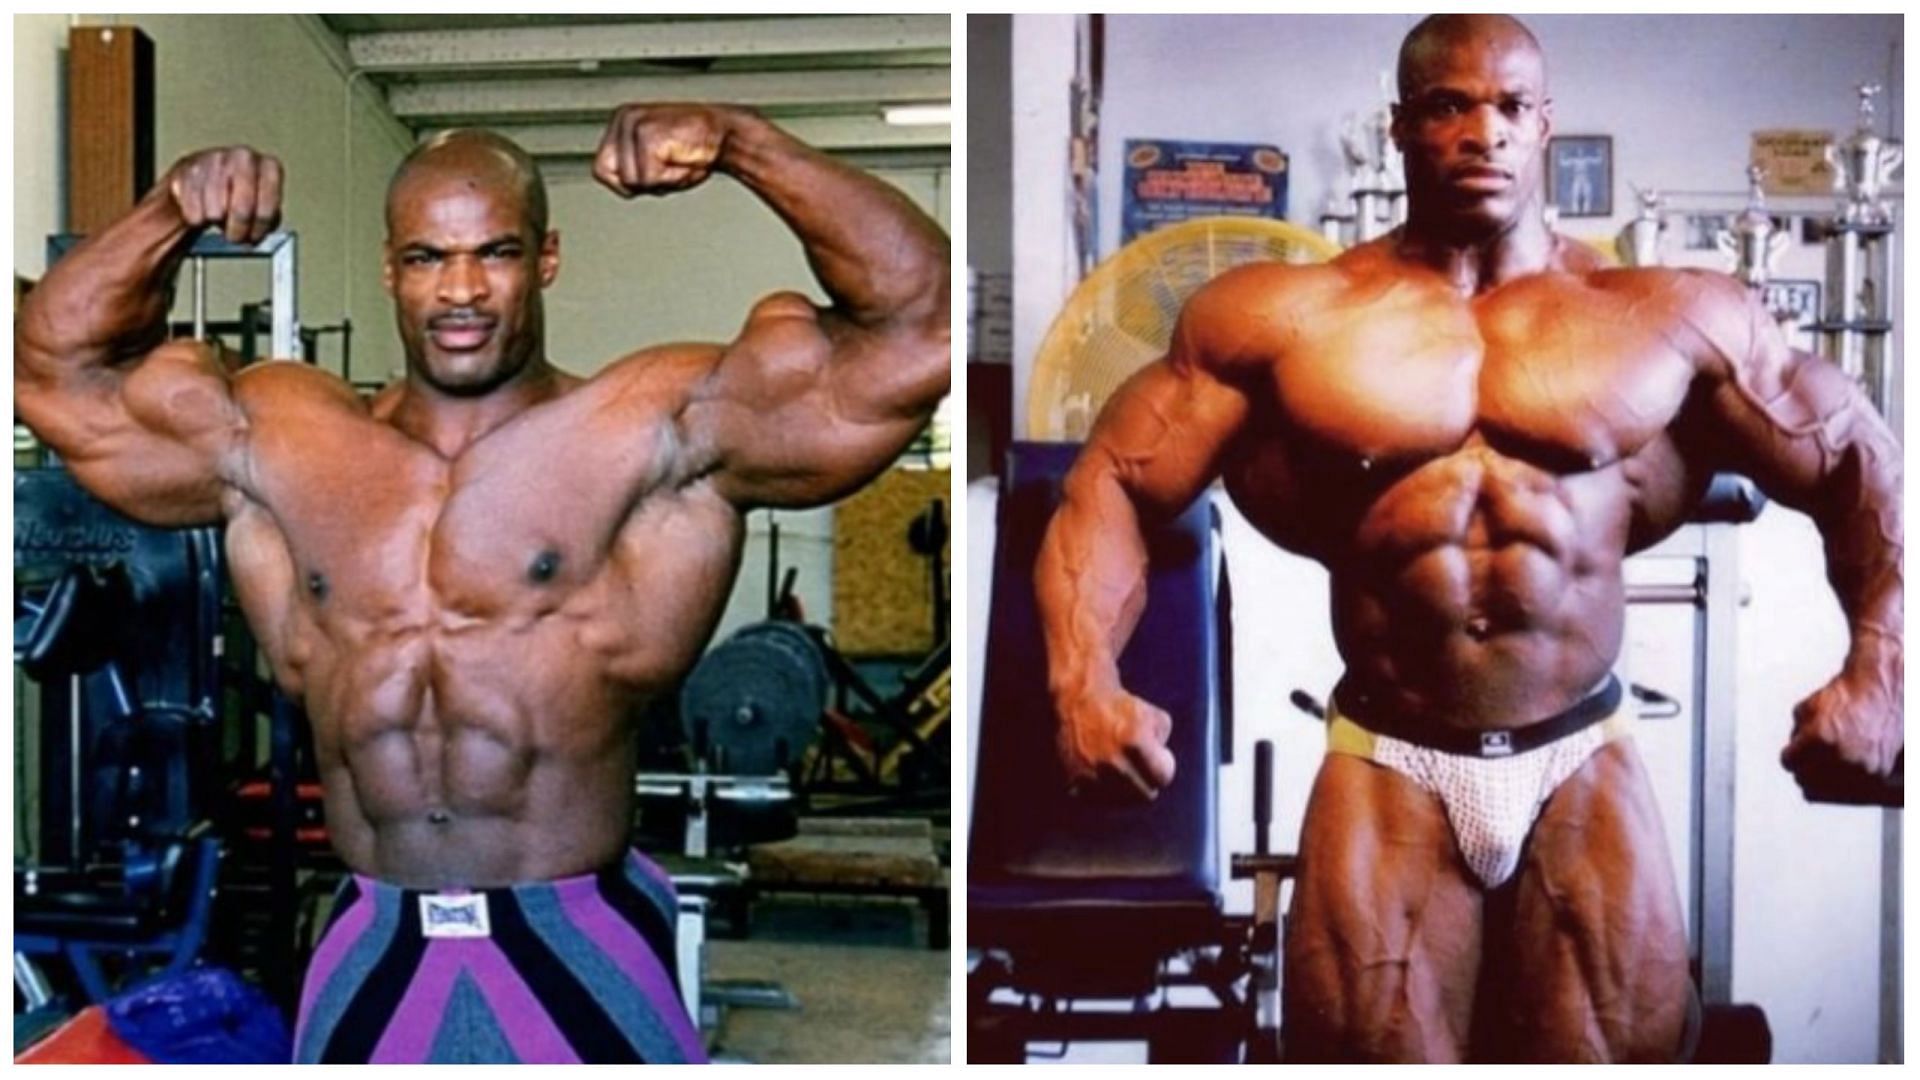 Ronnie Coleman ate about 5332 calories and 546 grams of protein each day to bulk up. (Image via Instagram @ronniecoleman8)